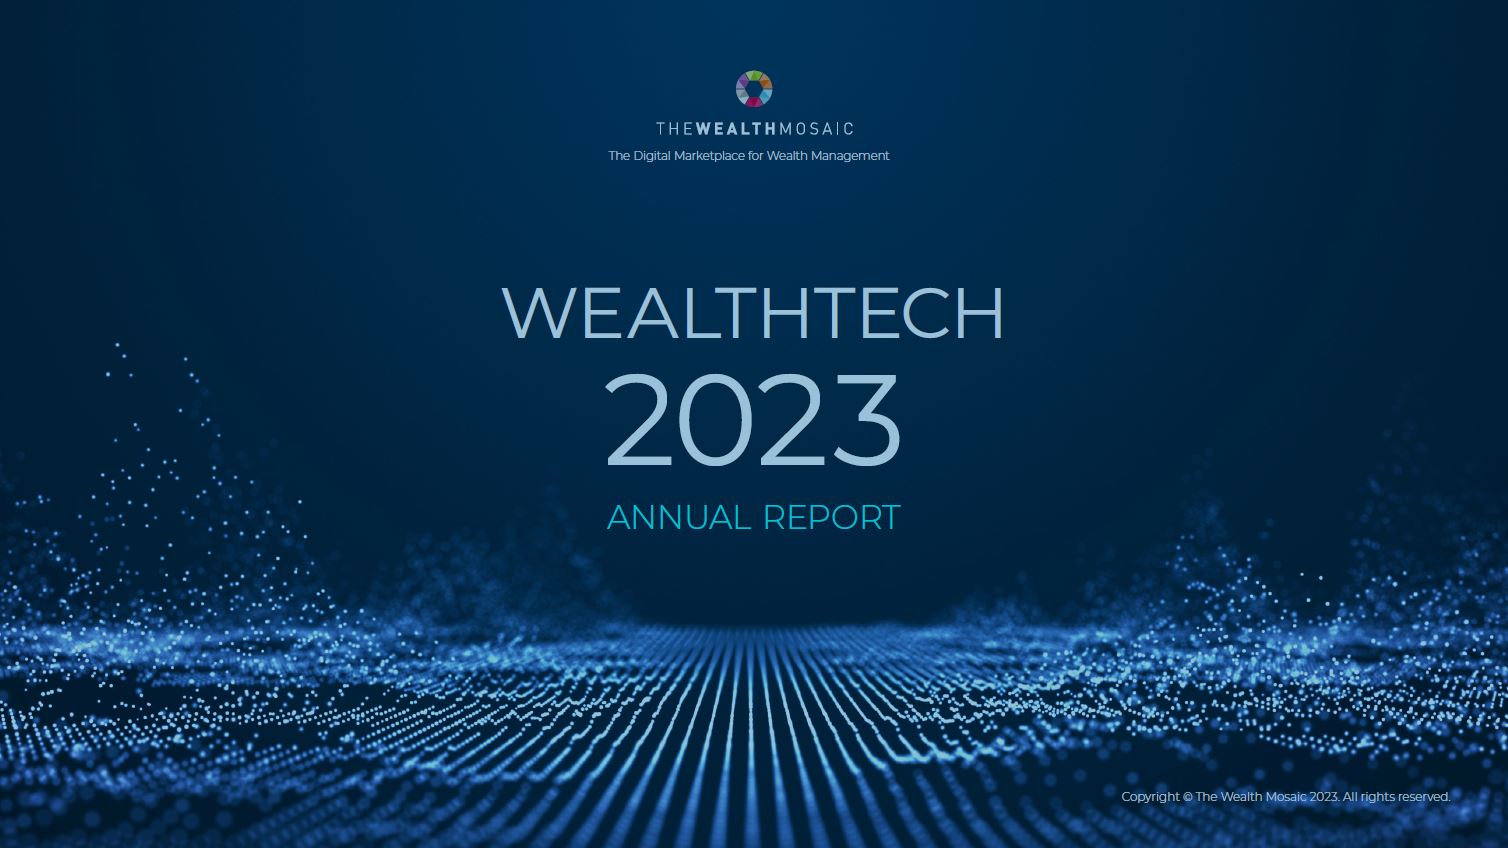 Objectway and The Wealth Mosaic WealthTech 2023 Annual Report Cover